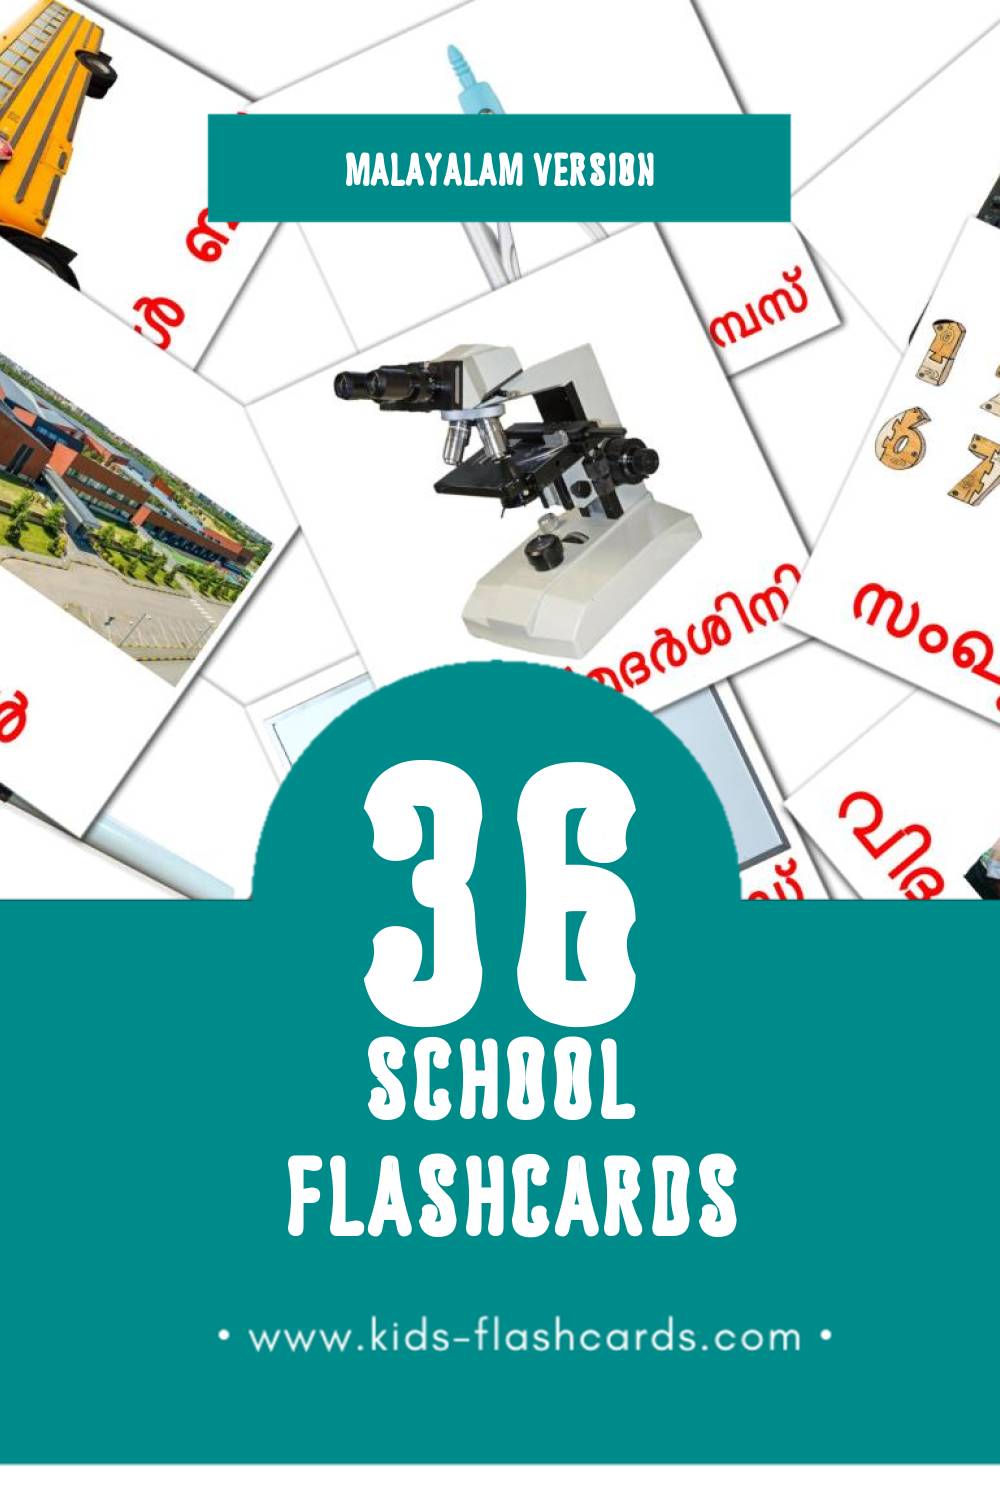 Visual സ്കൂൾ Flashcards for Toddlers (36 cards in Malayalam)